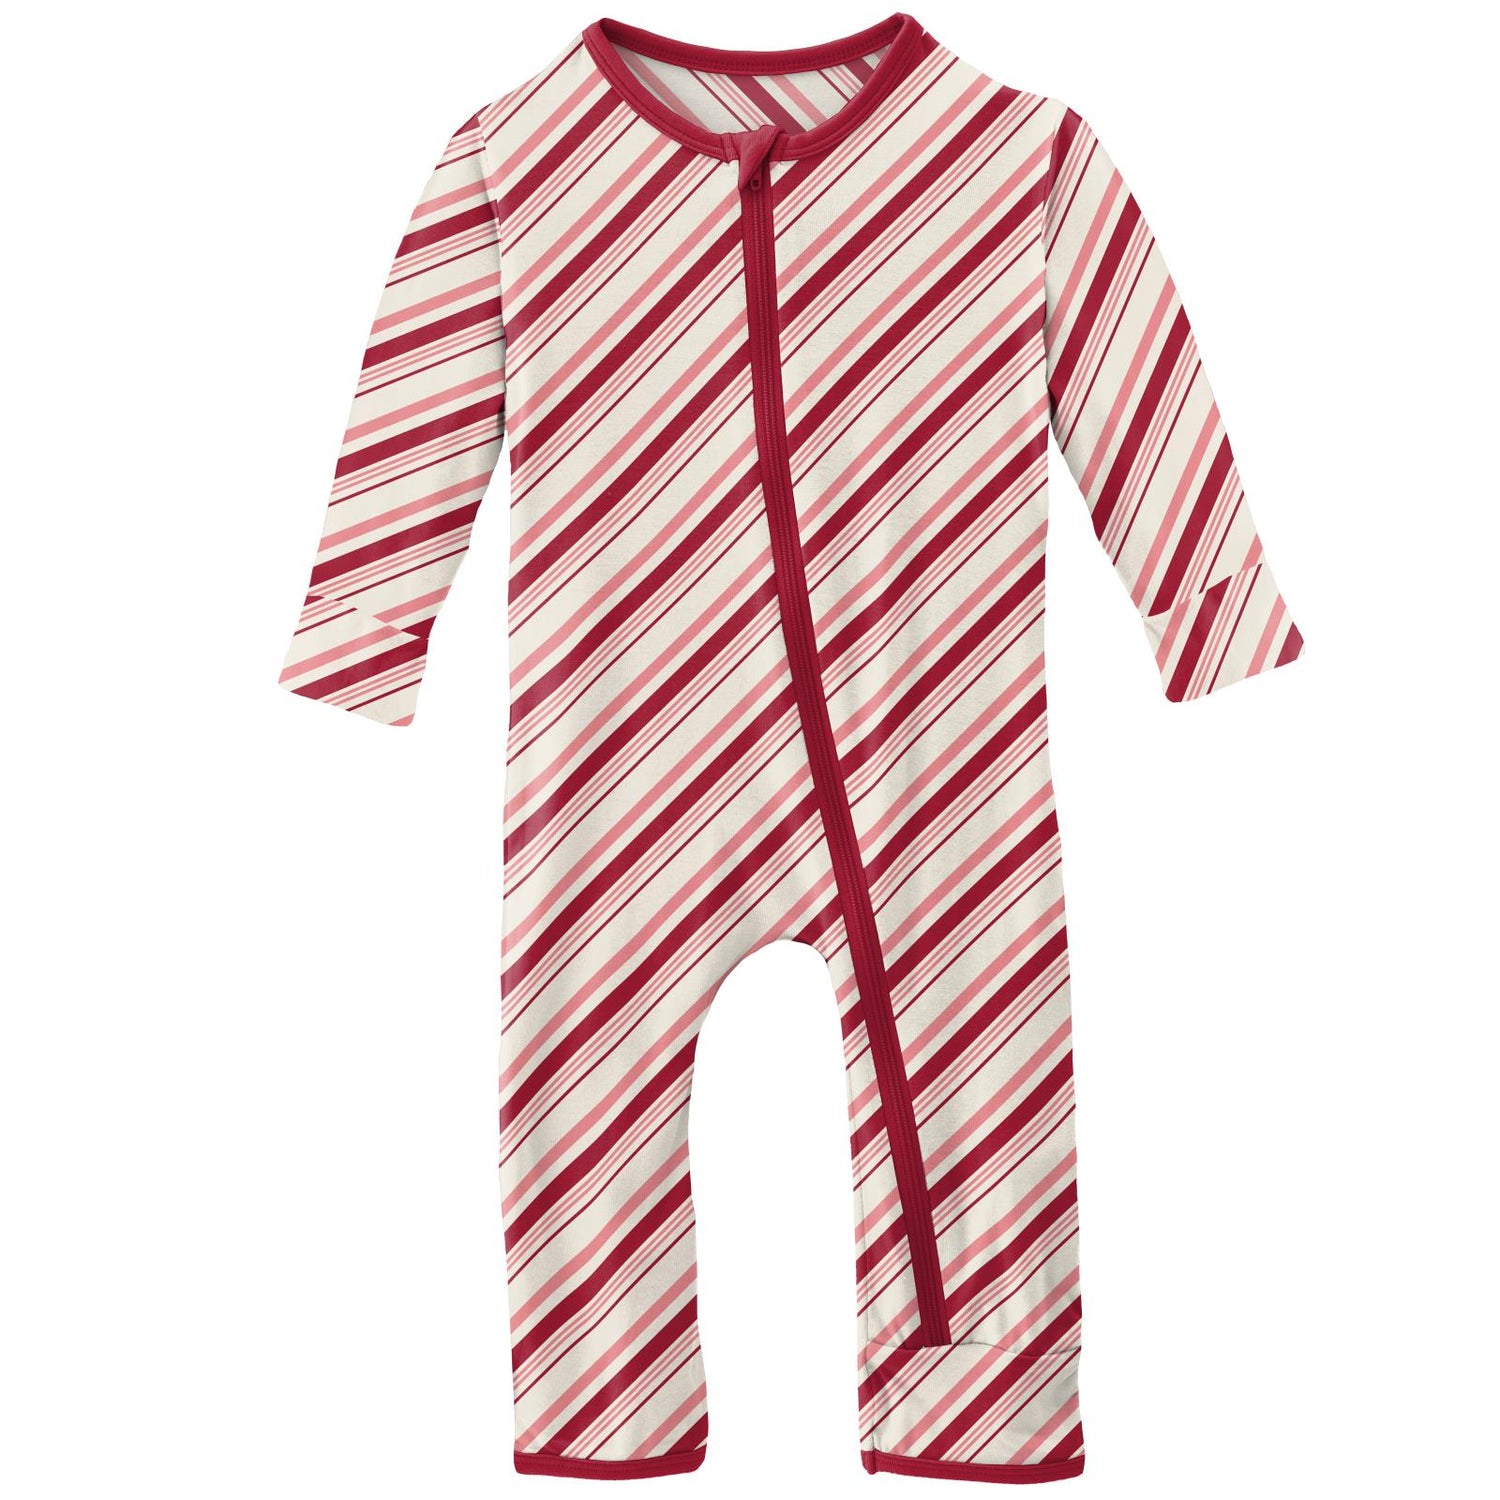 Print Coverall with Zipper in Strawberry Candy Cane Stripe